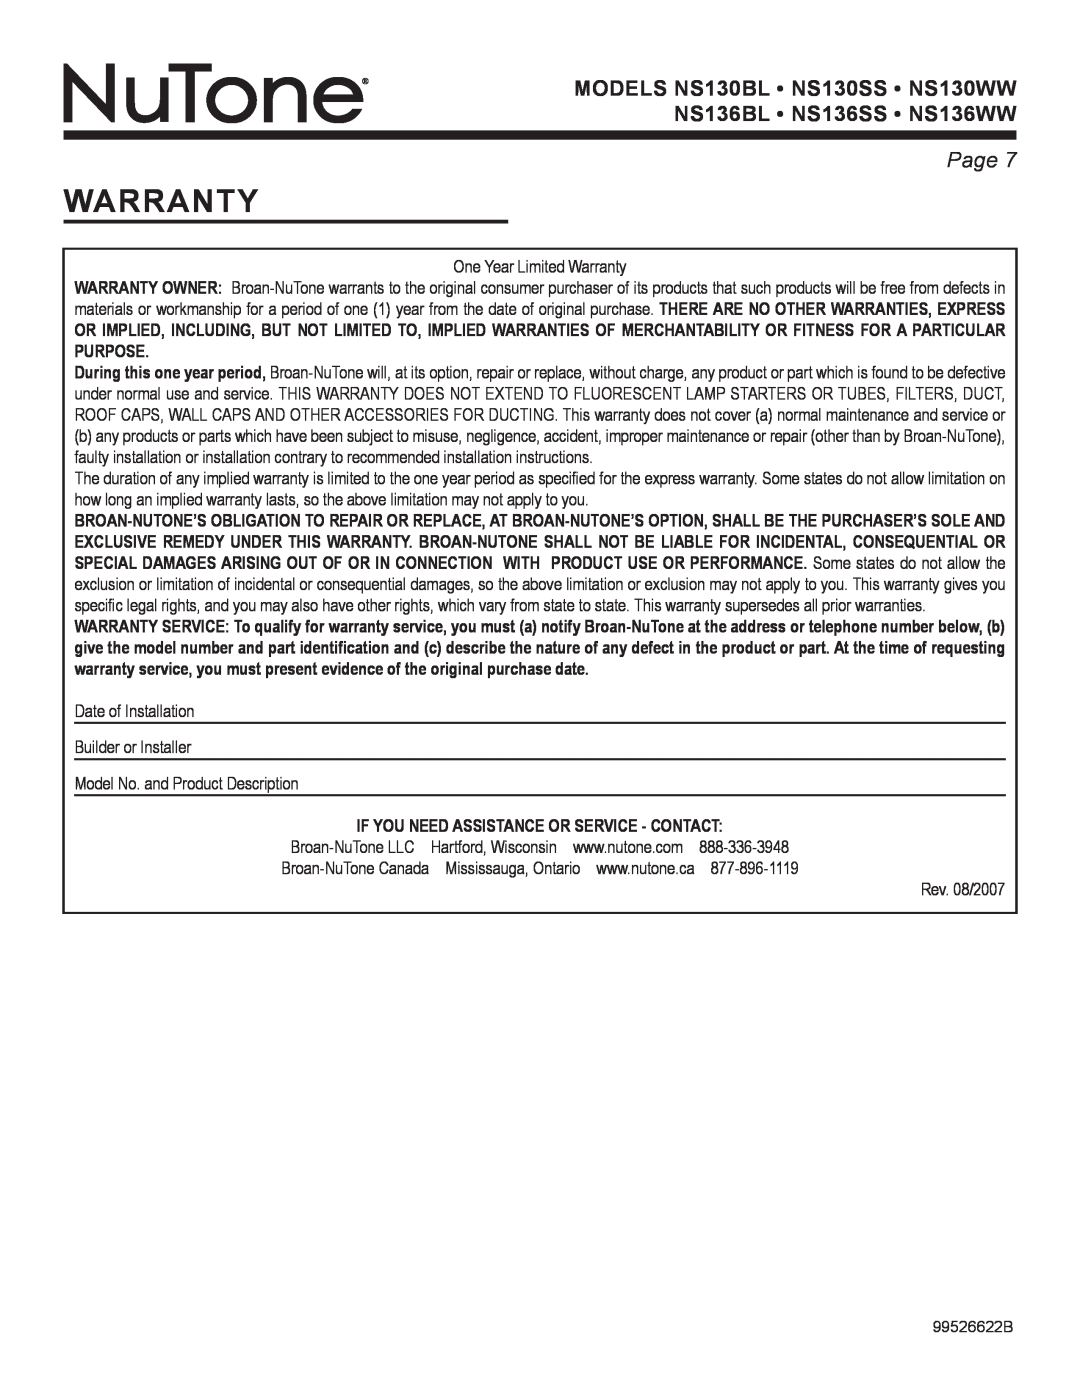 NuTone NS Series warranty, One Year Limited Warranty, Date of Installation Builder or Installer, Rev. 08/2007, Page  